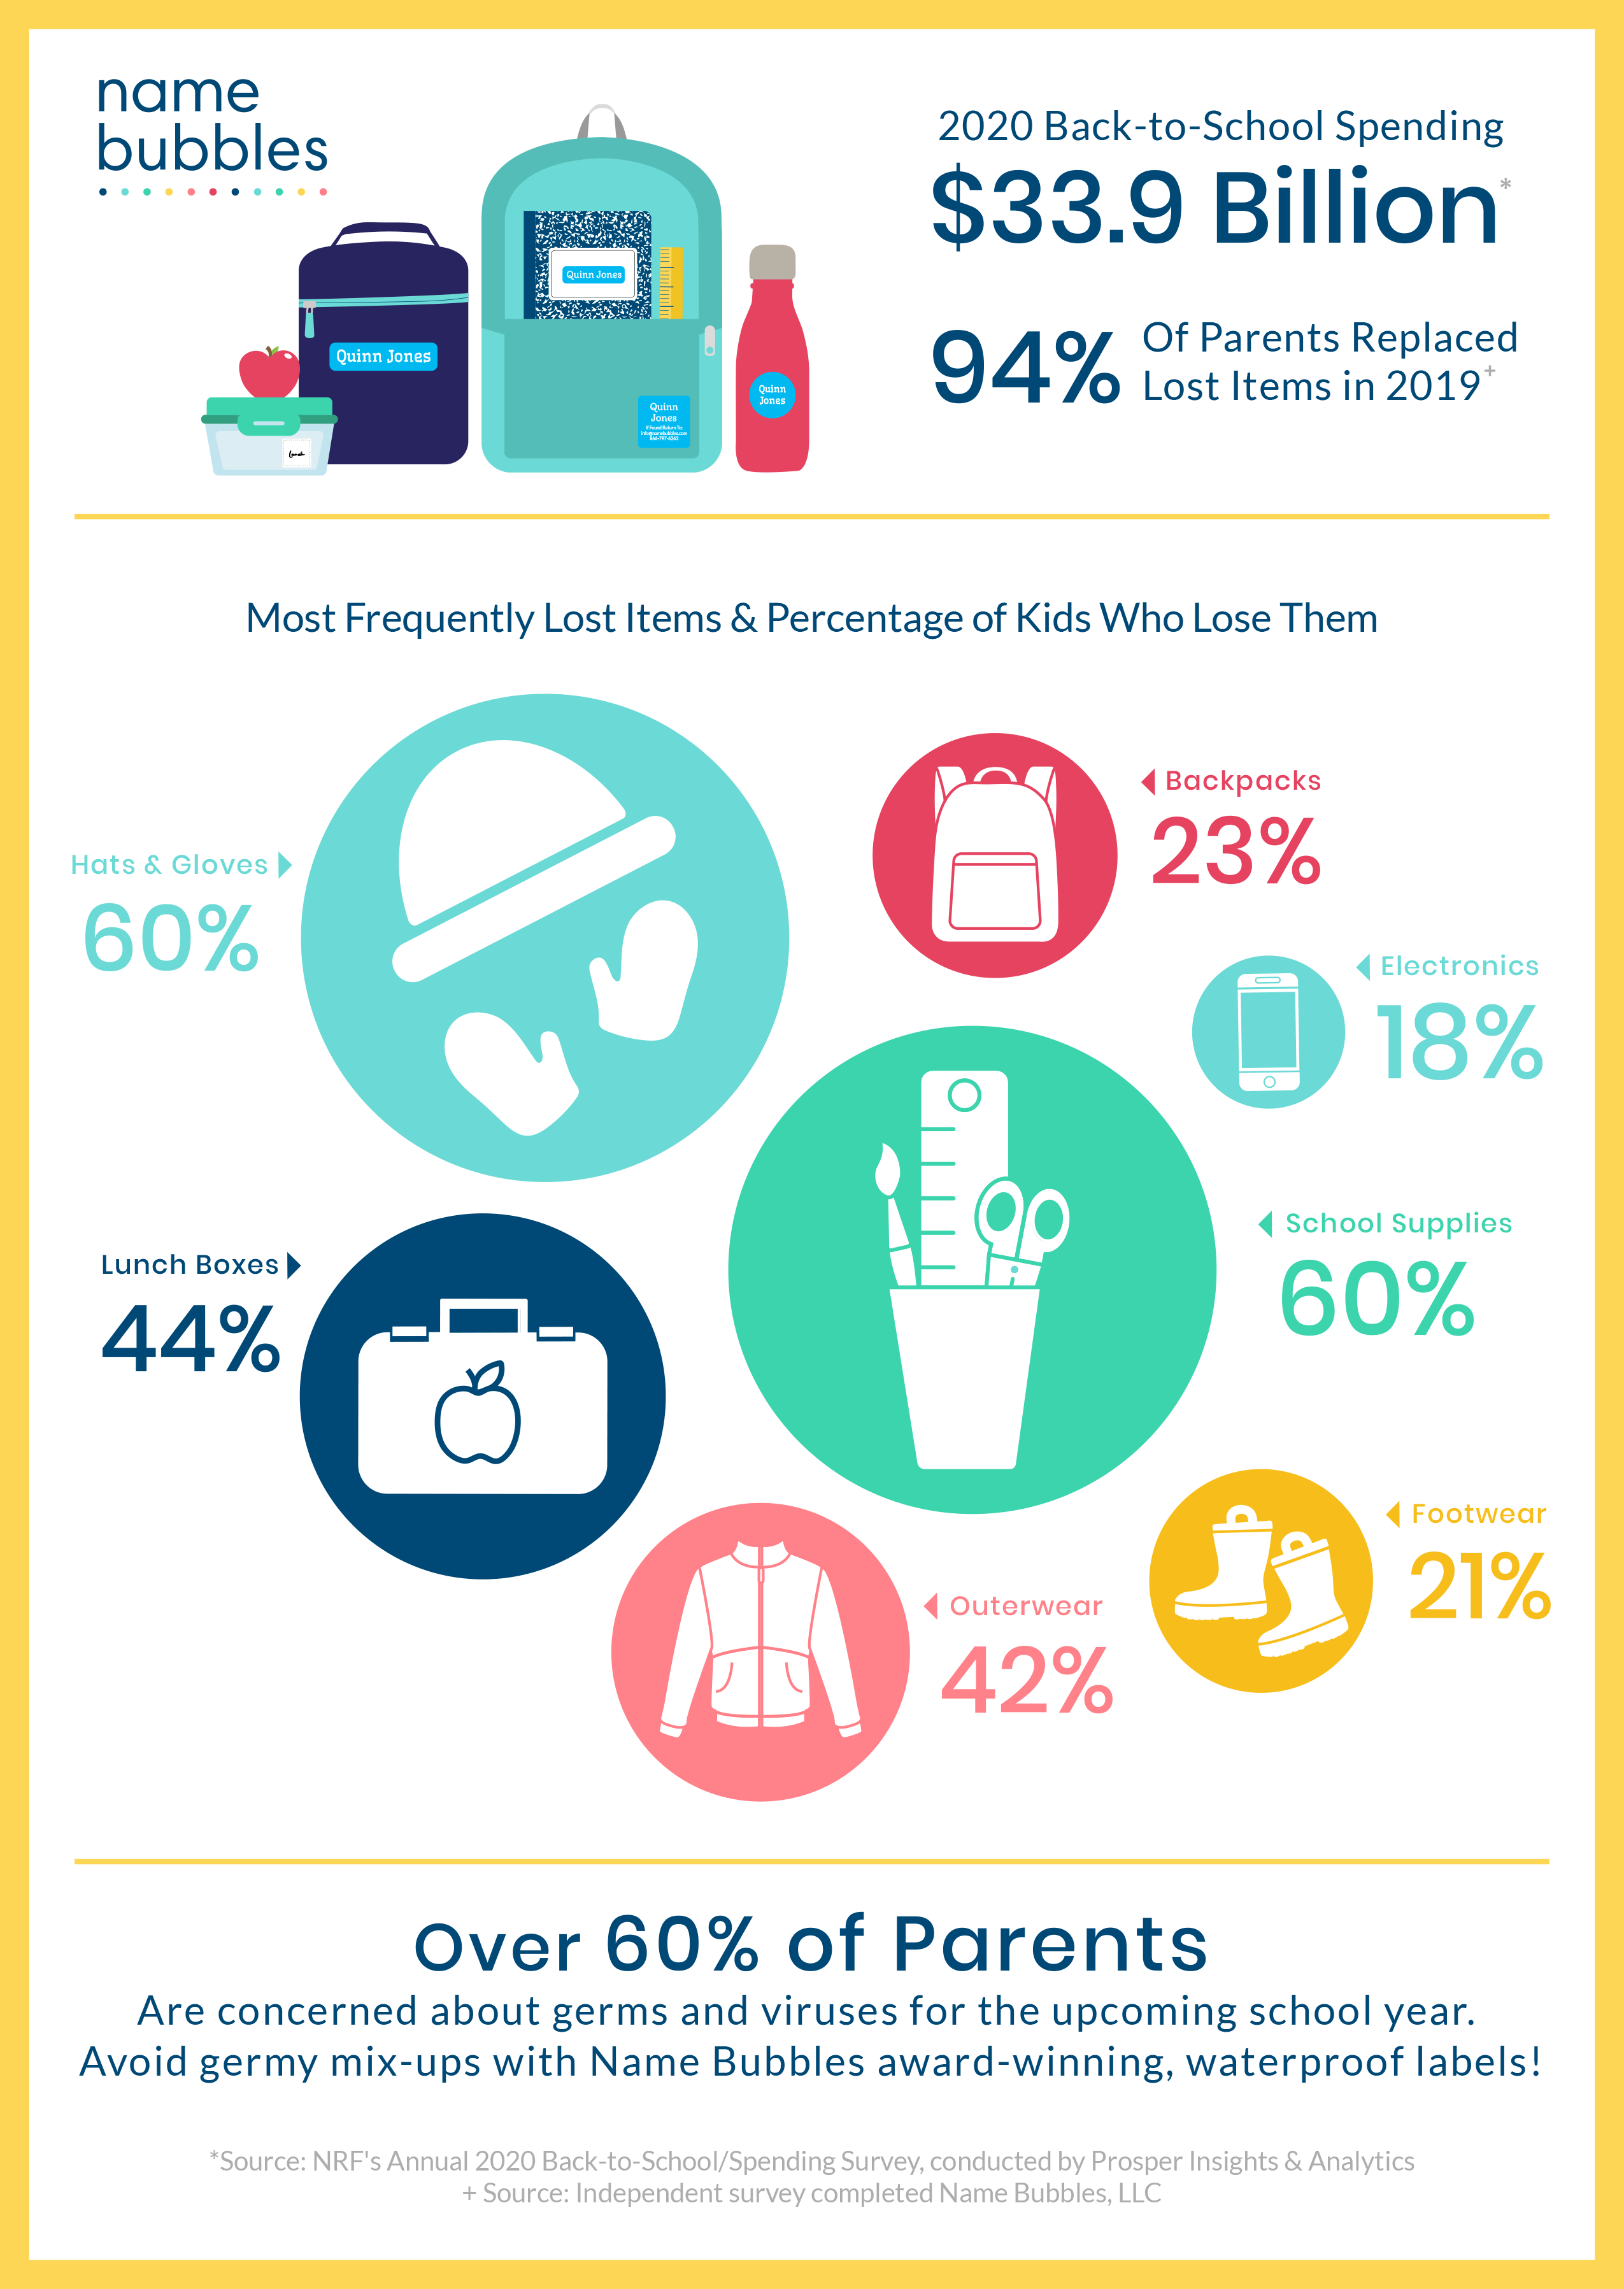 The most frequently lost items by children 